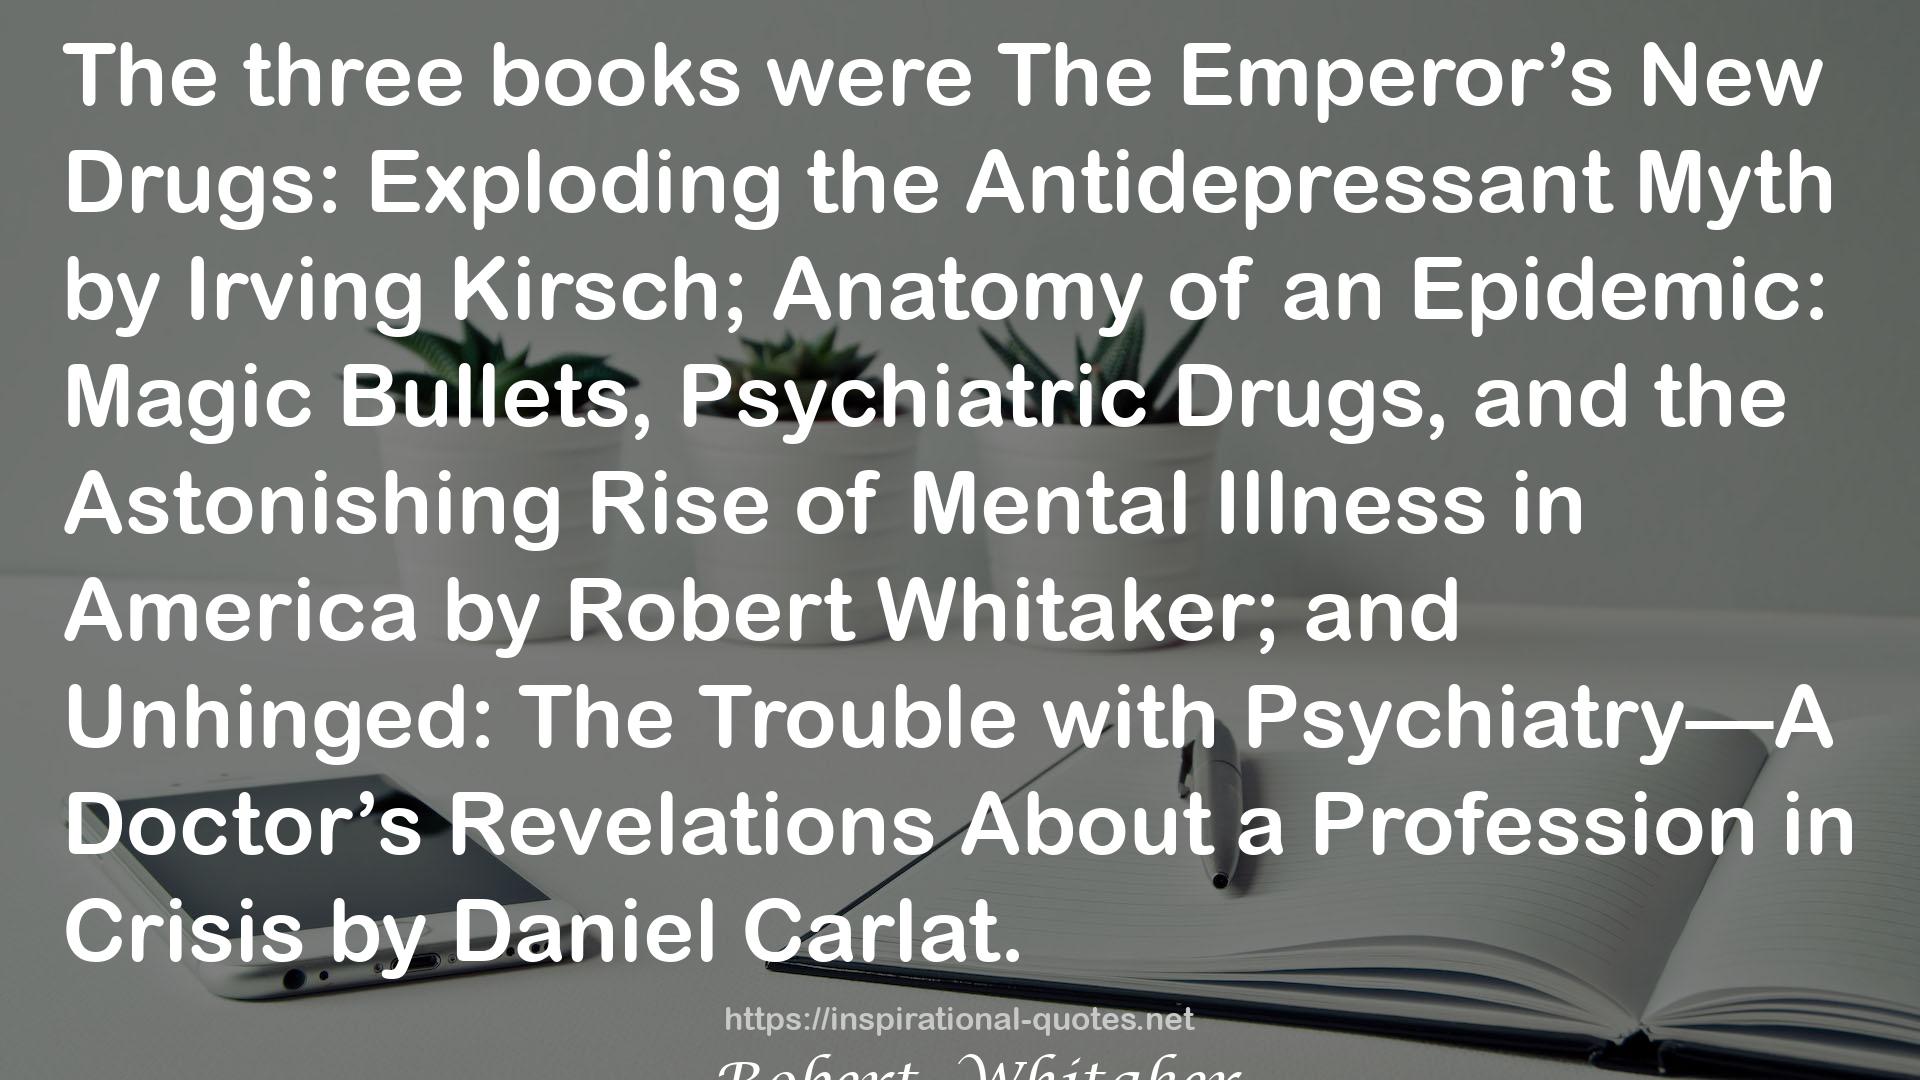 Psychiatry Under the Influence: Institutional Corruption, Social Injury, and Prescriptions for Reform QUOTES